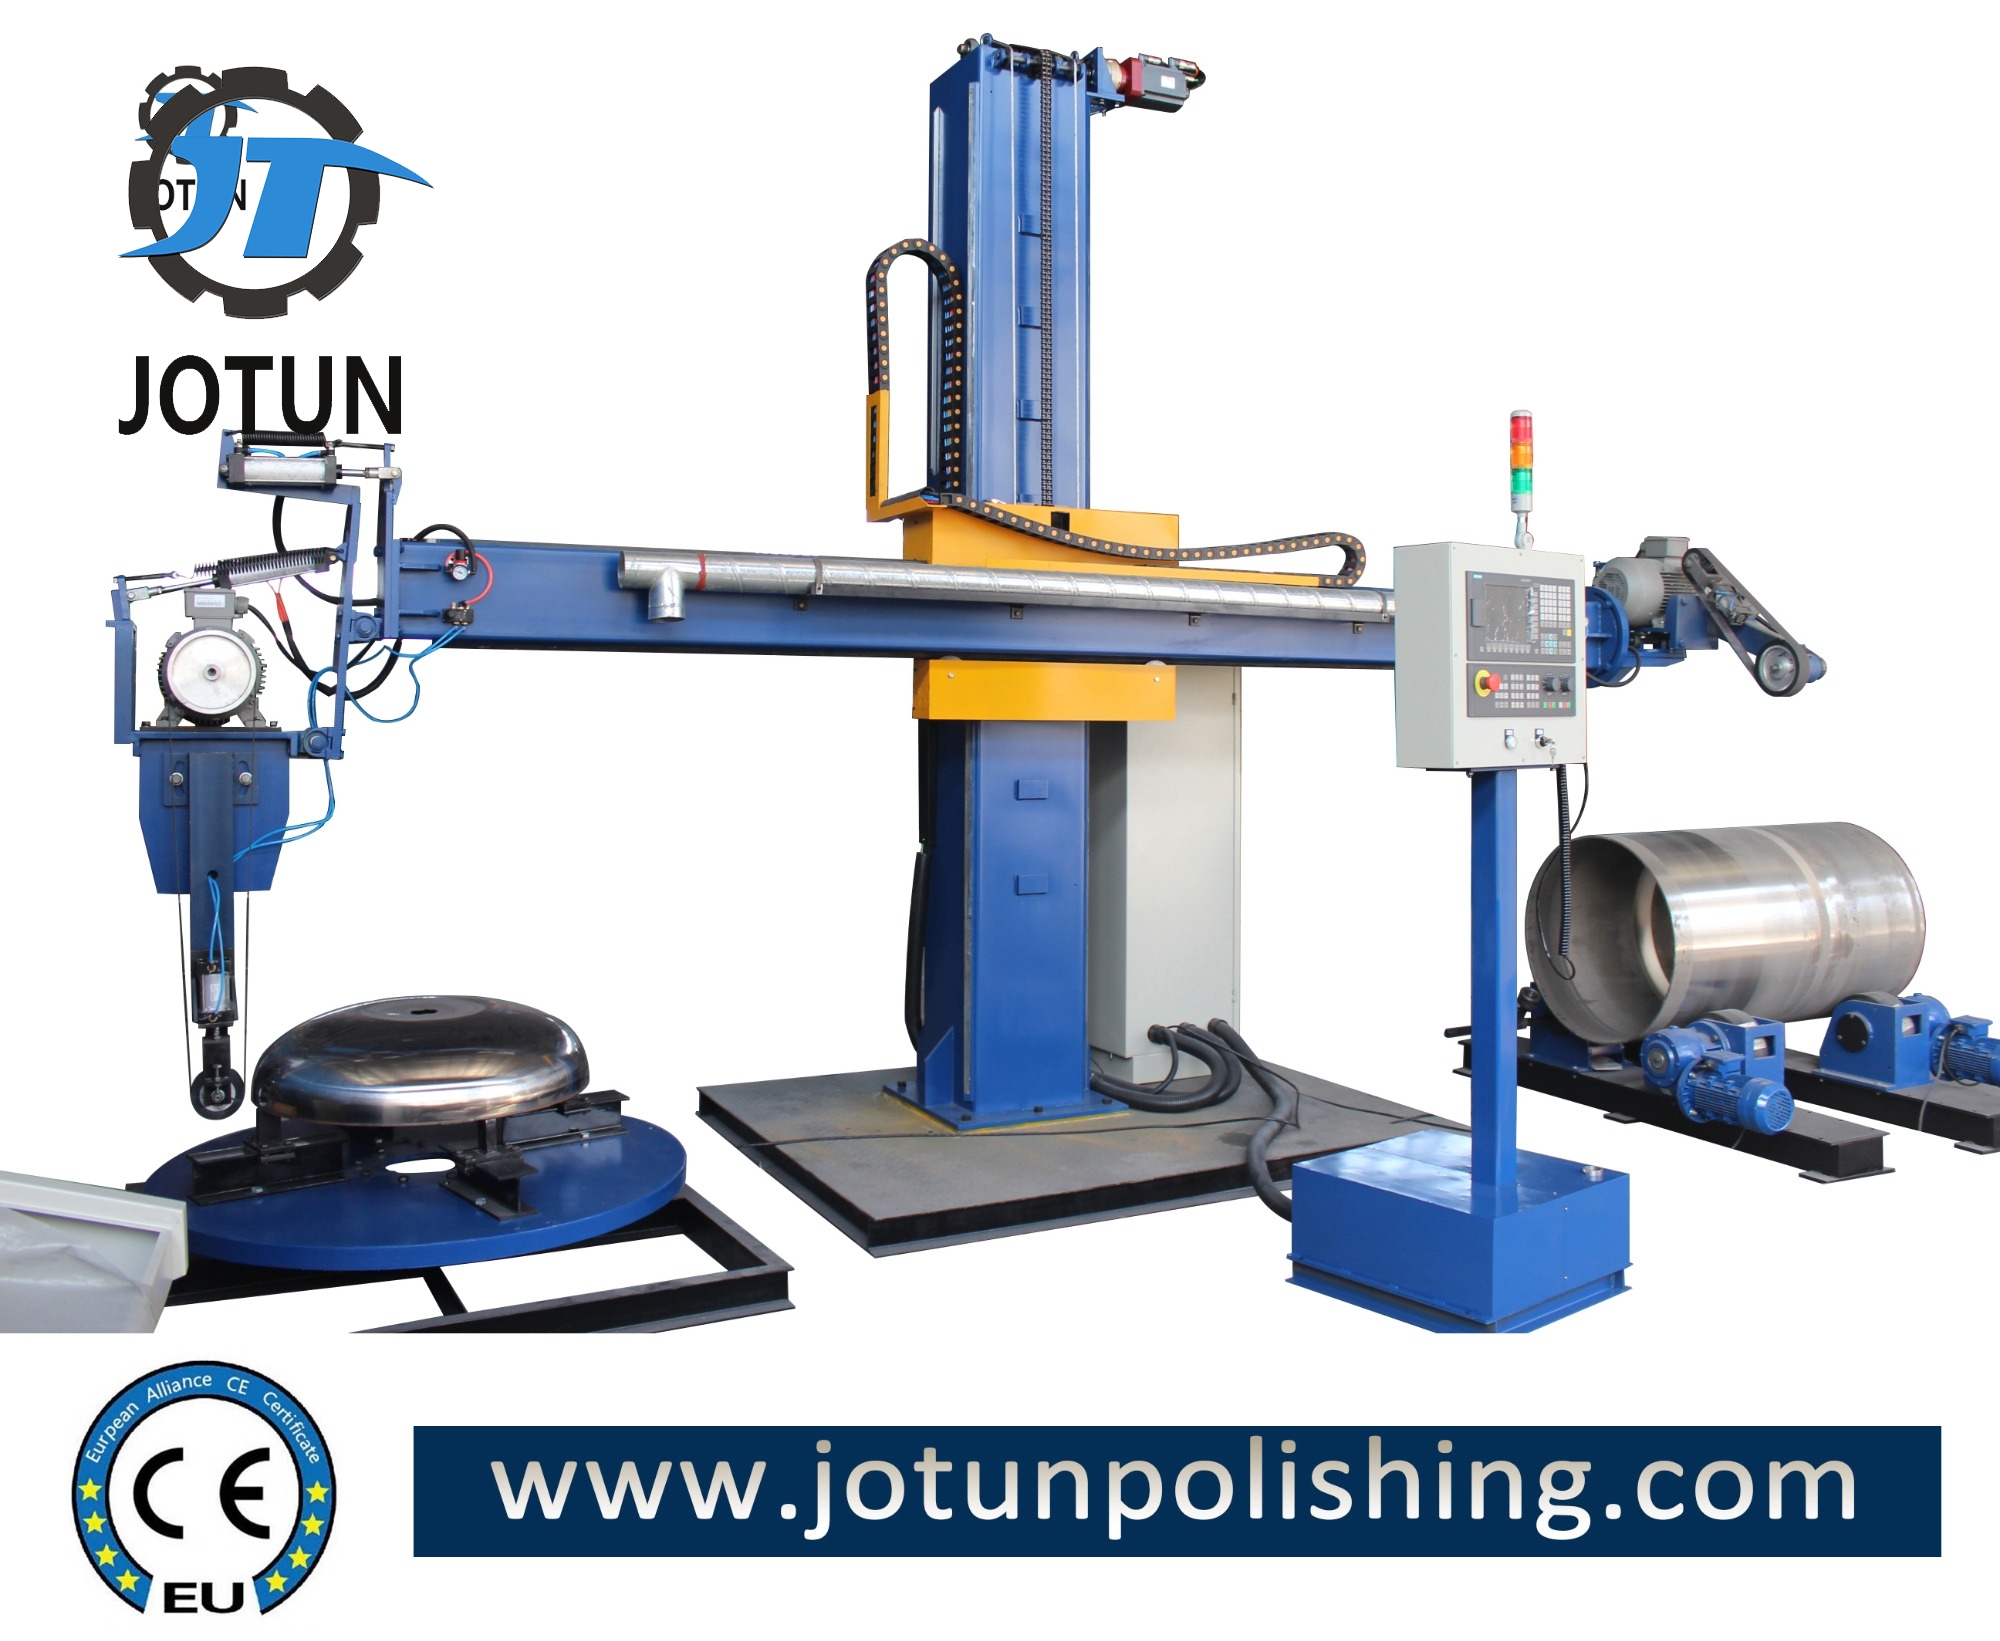 CNC stainless steel polishing machine for tank and dish end